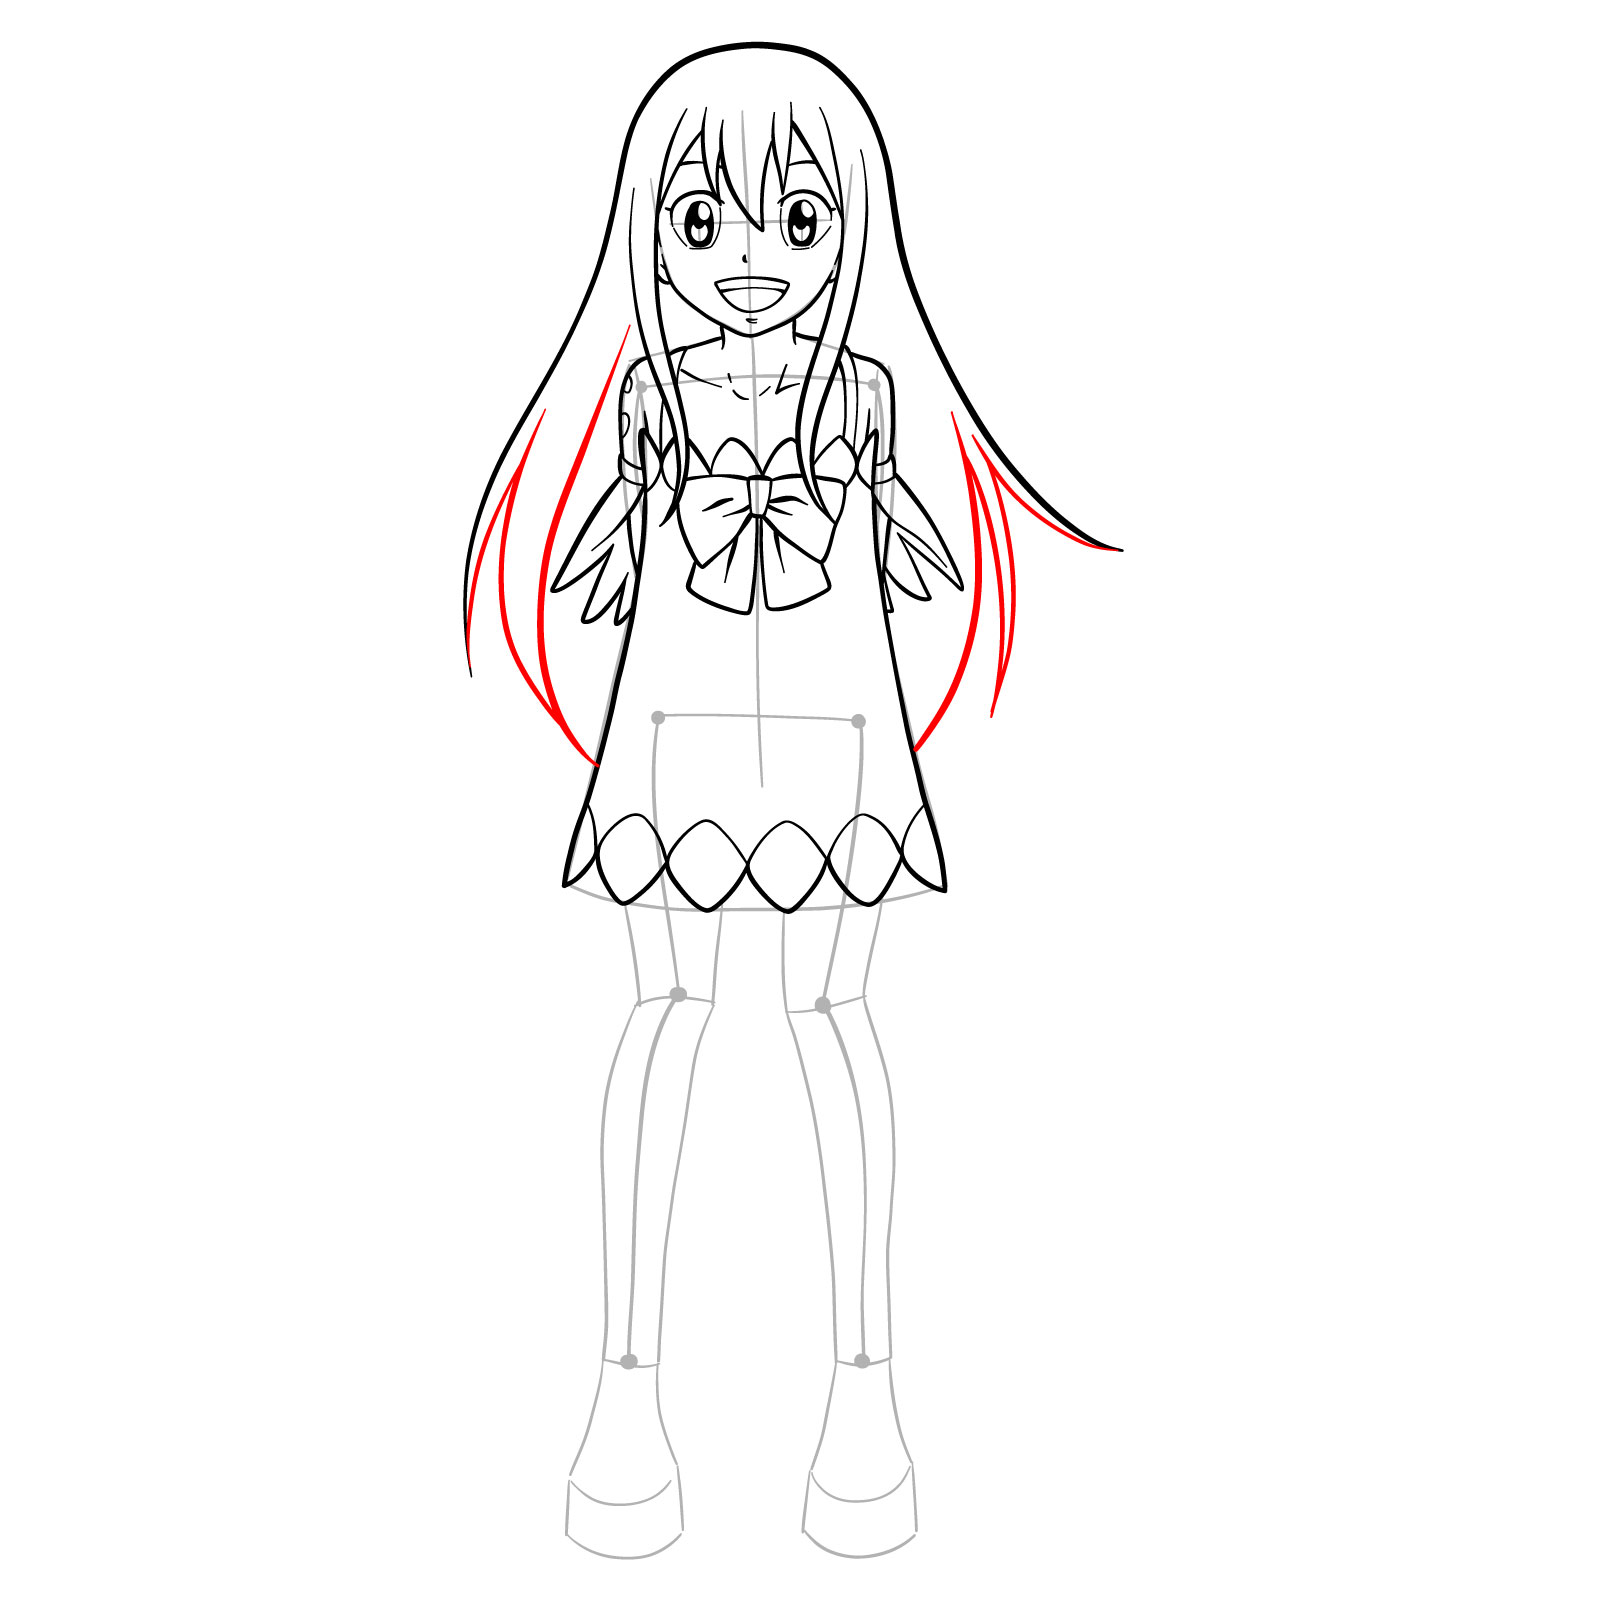 How to draw Wendy Marvell from Fairy Tail - step 18